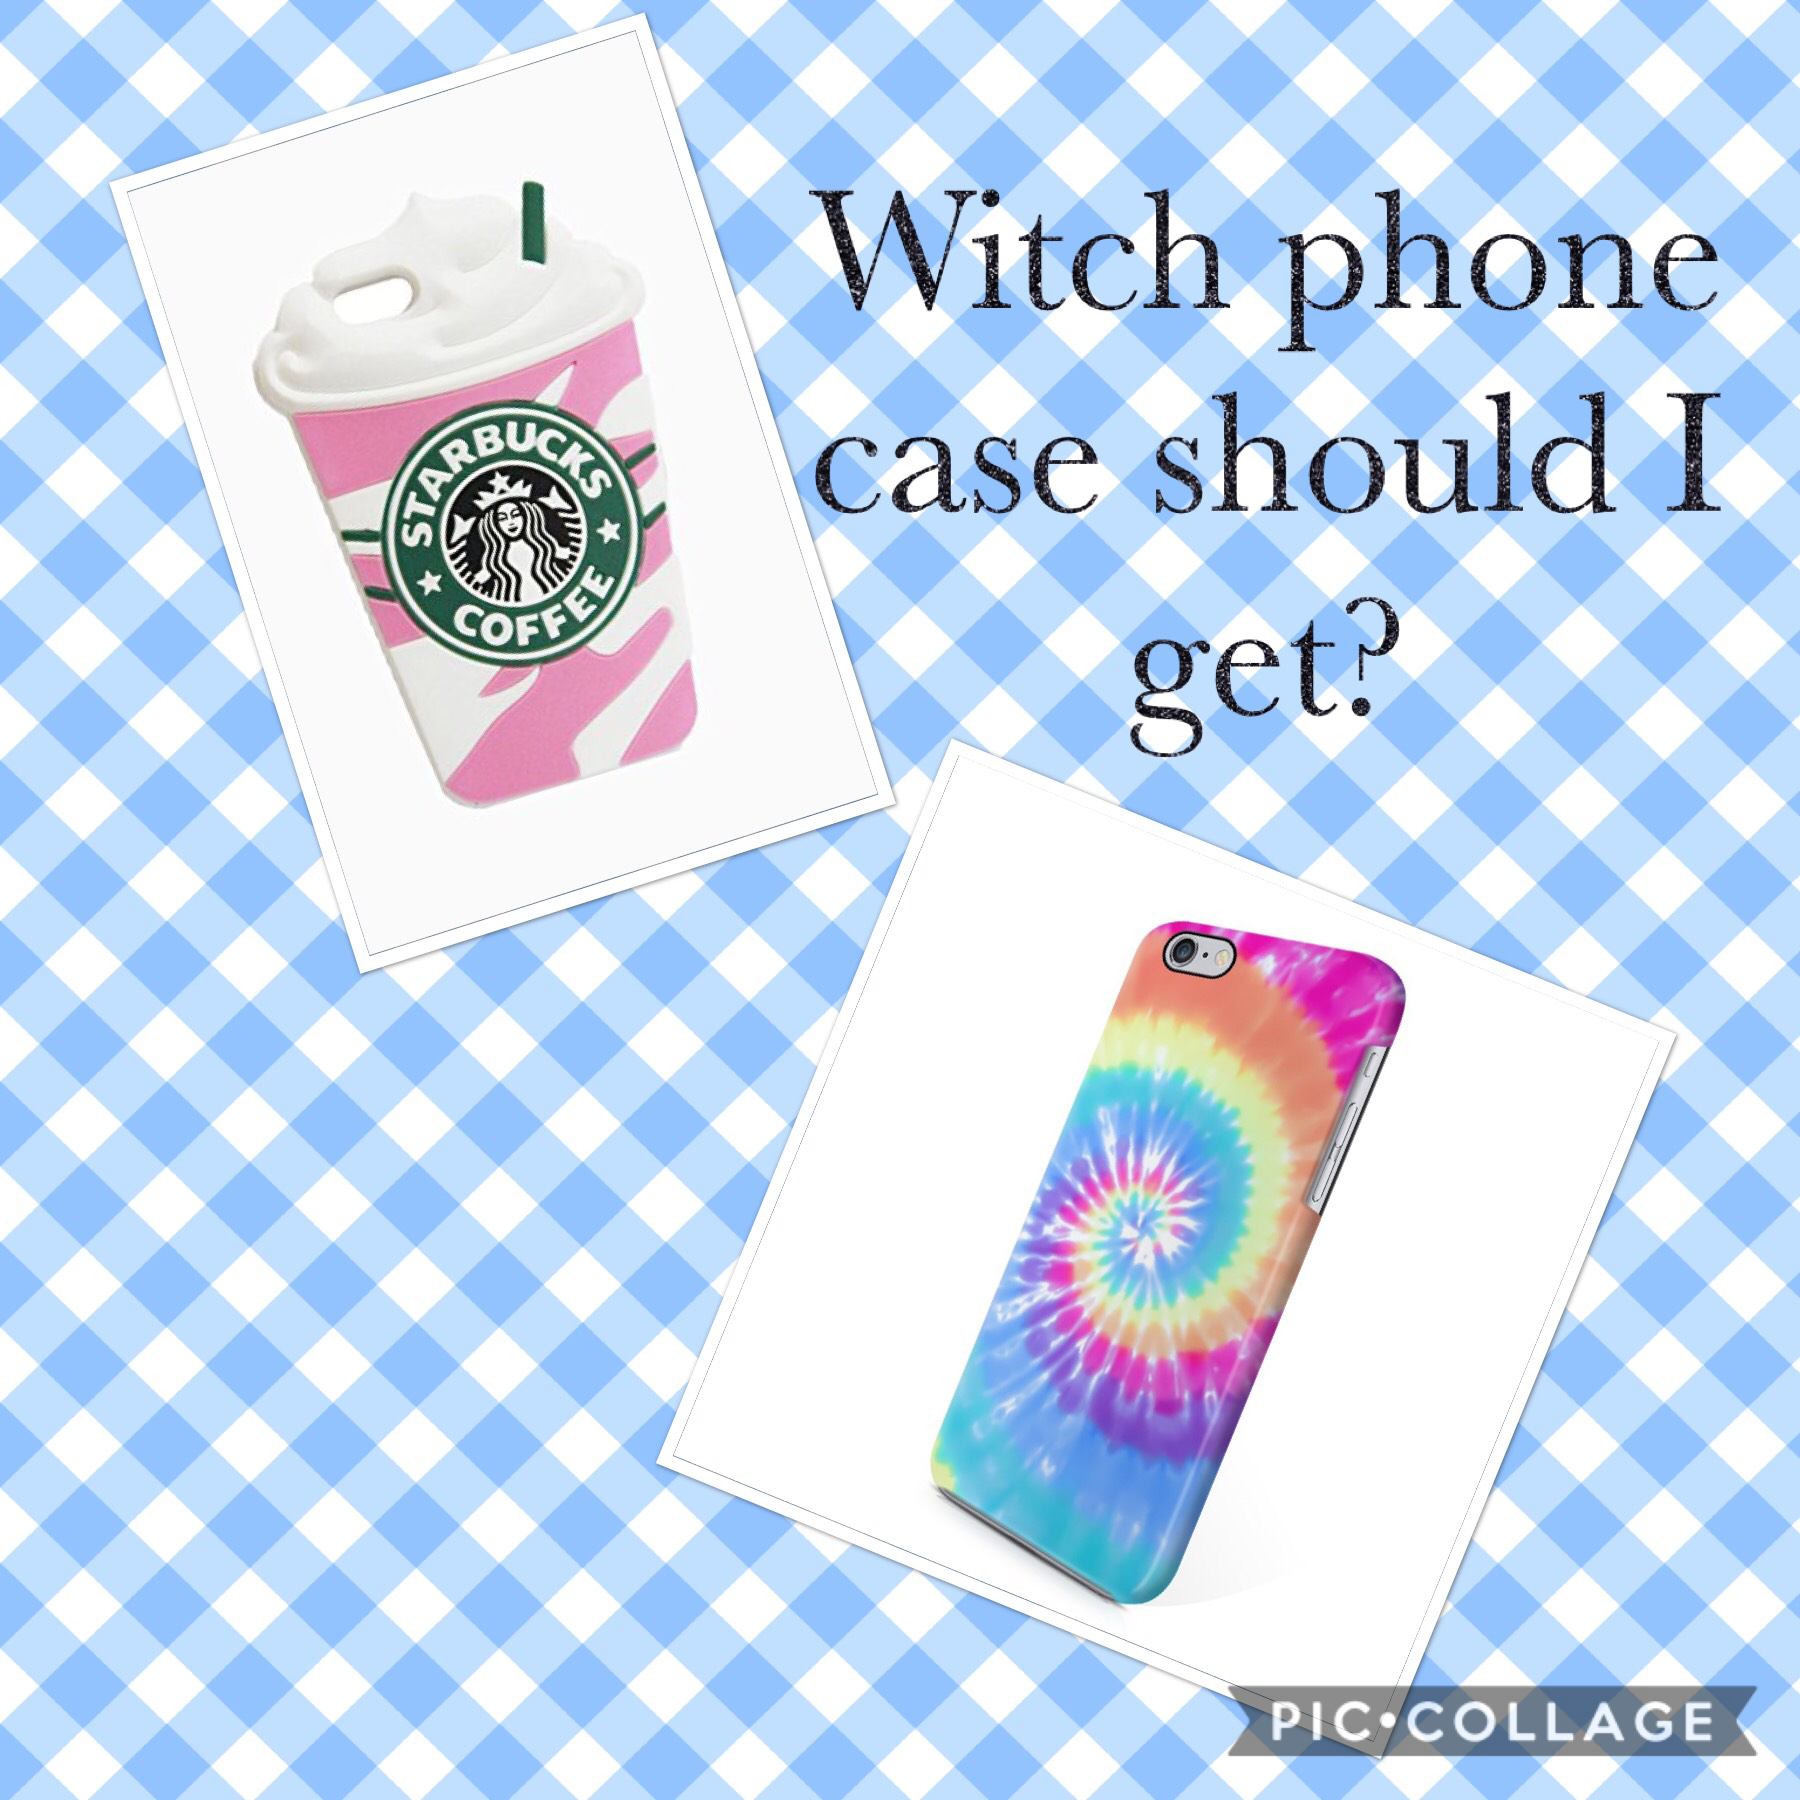 Witch phone case should I get? It’s hard for me to pick.